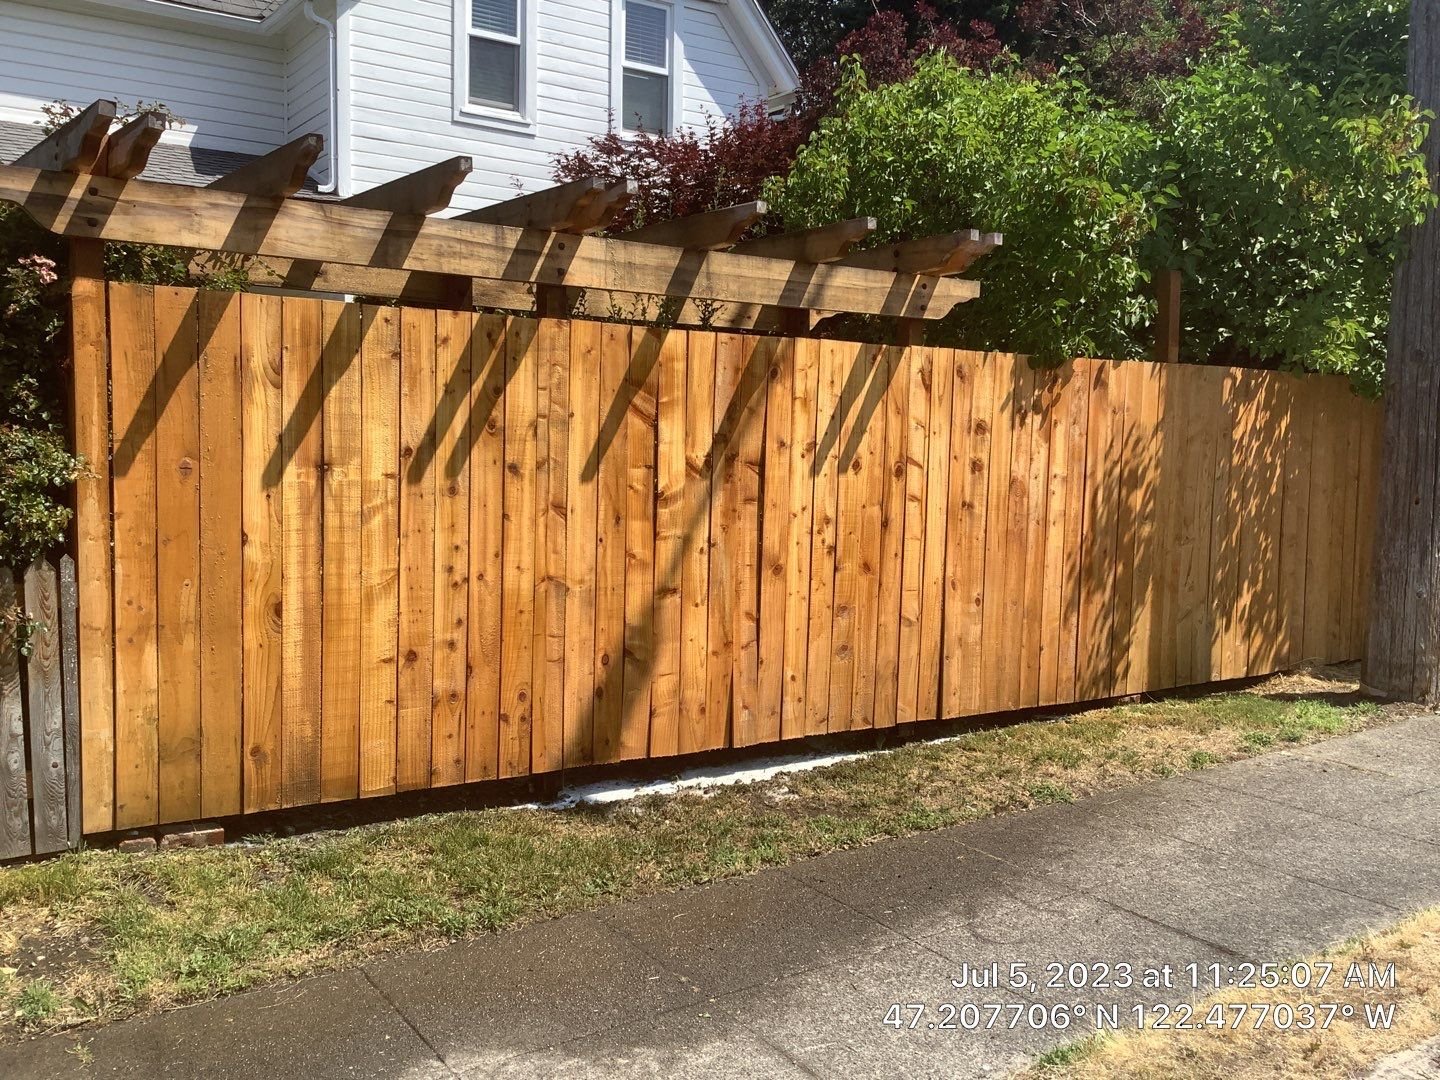 graffiti-removal-service-on-wood-fence-clean-Tacoma.jpg